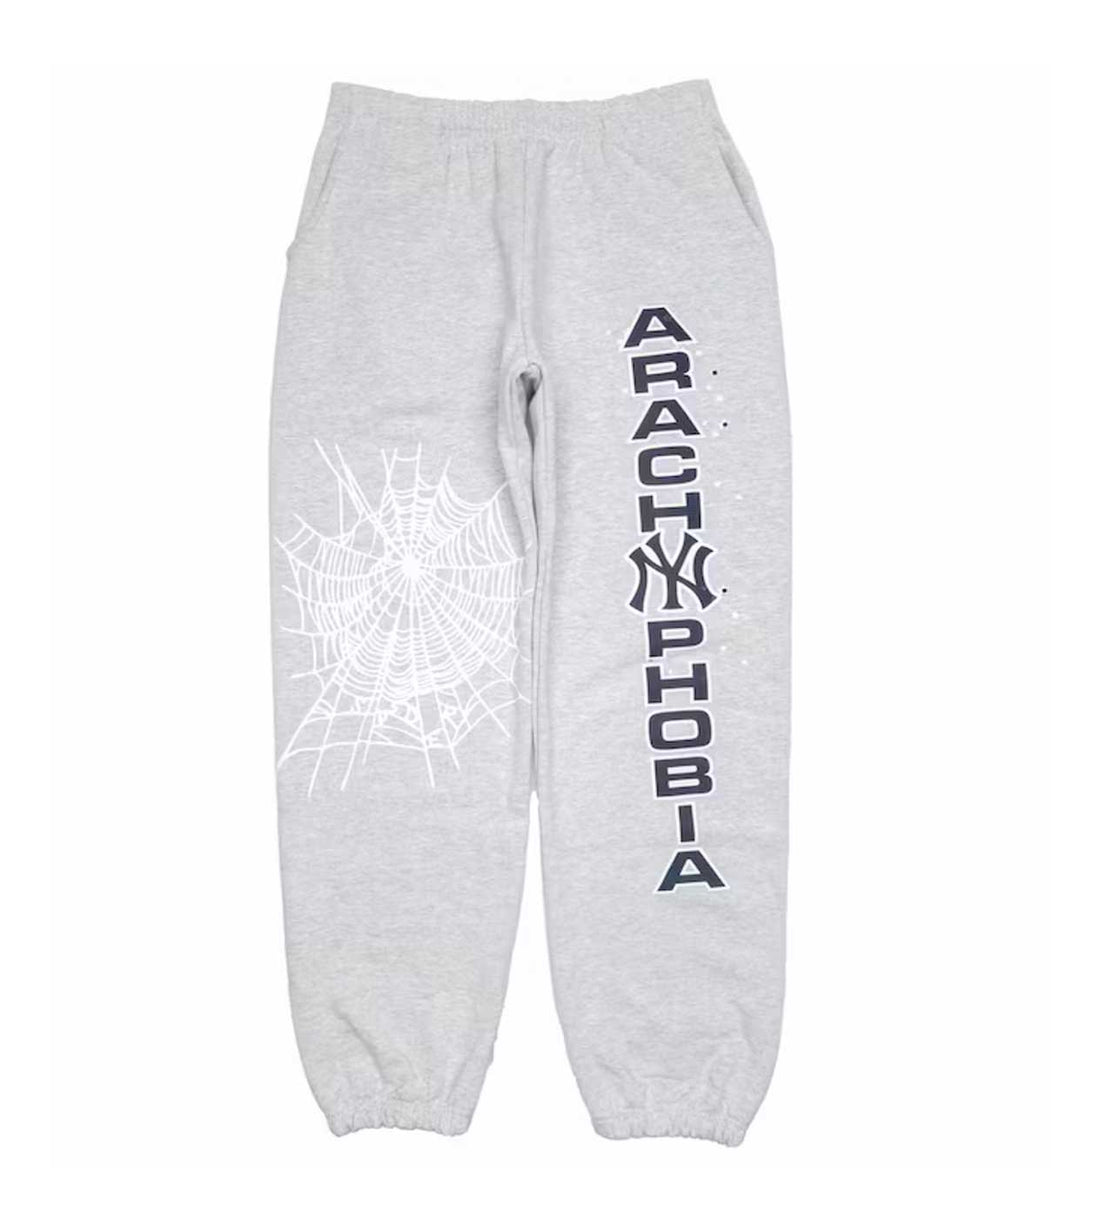 SP5DER SWEATPANTS RESTOCK🗣️🗣️ DM OR CALL TO PLACE AN ORDER! FIRST COME,  FIRST SERVE! - THE PRIVATE SHOP